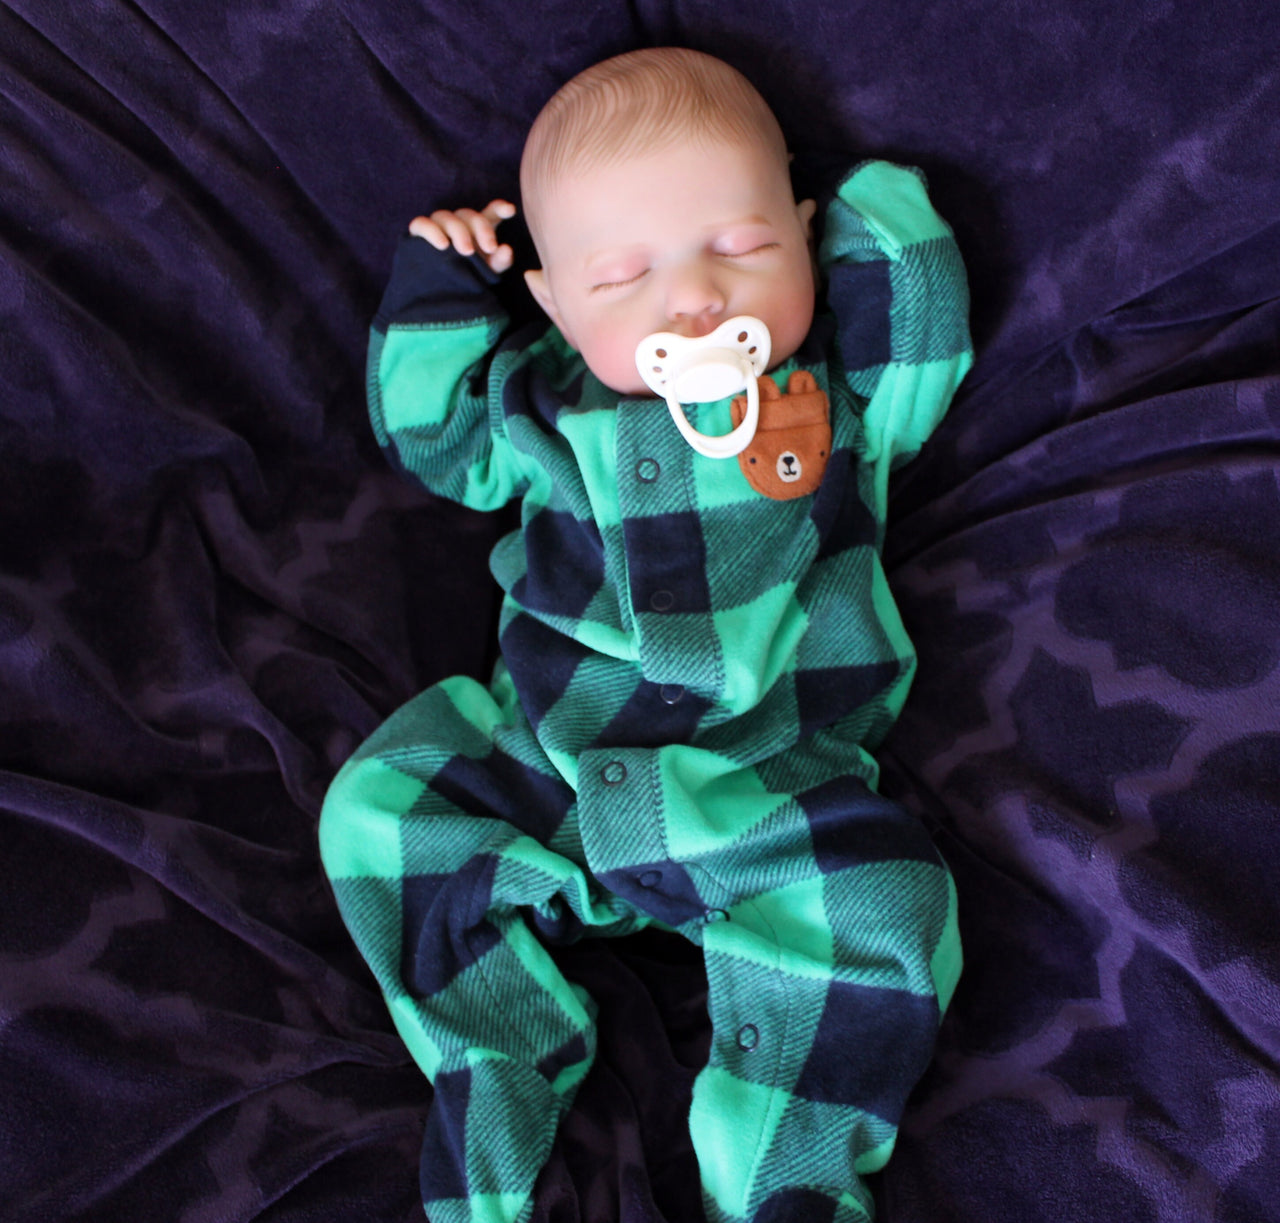 20&quot; Reborn Therapy Baby Doll - Lifelike Weighted Newborn Plaid Christmas Outfit, Child-Friendly, Ideal for Realistic Play, Unique Xmas Gift Copy